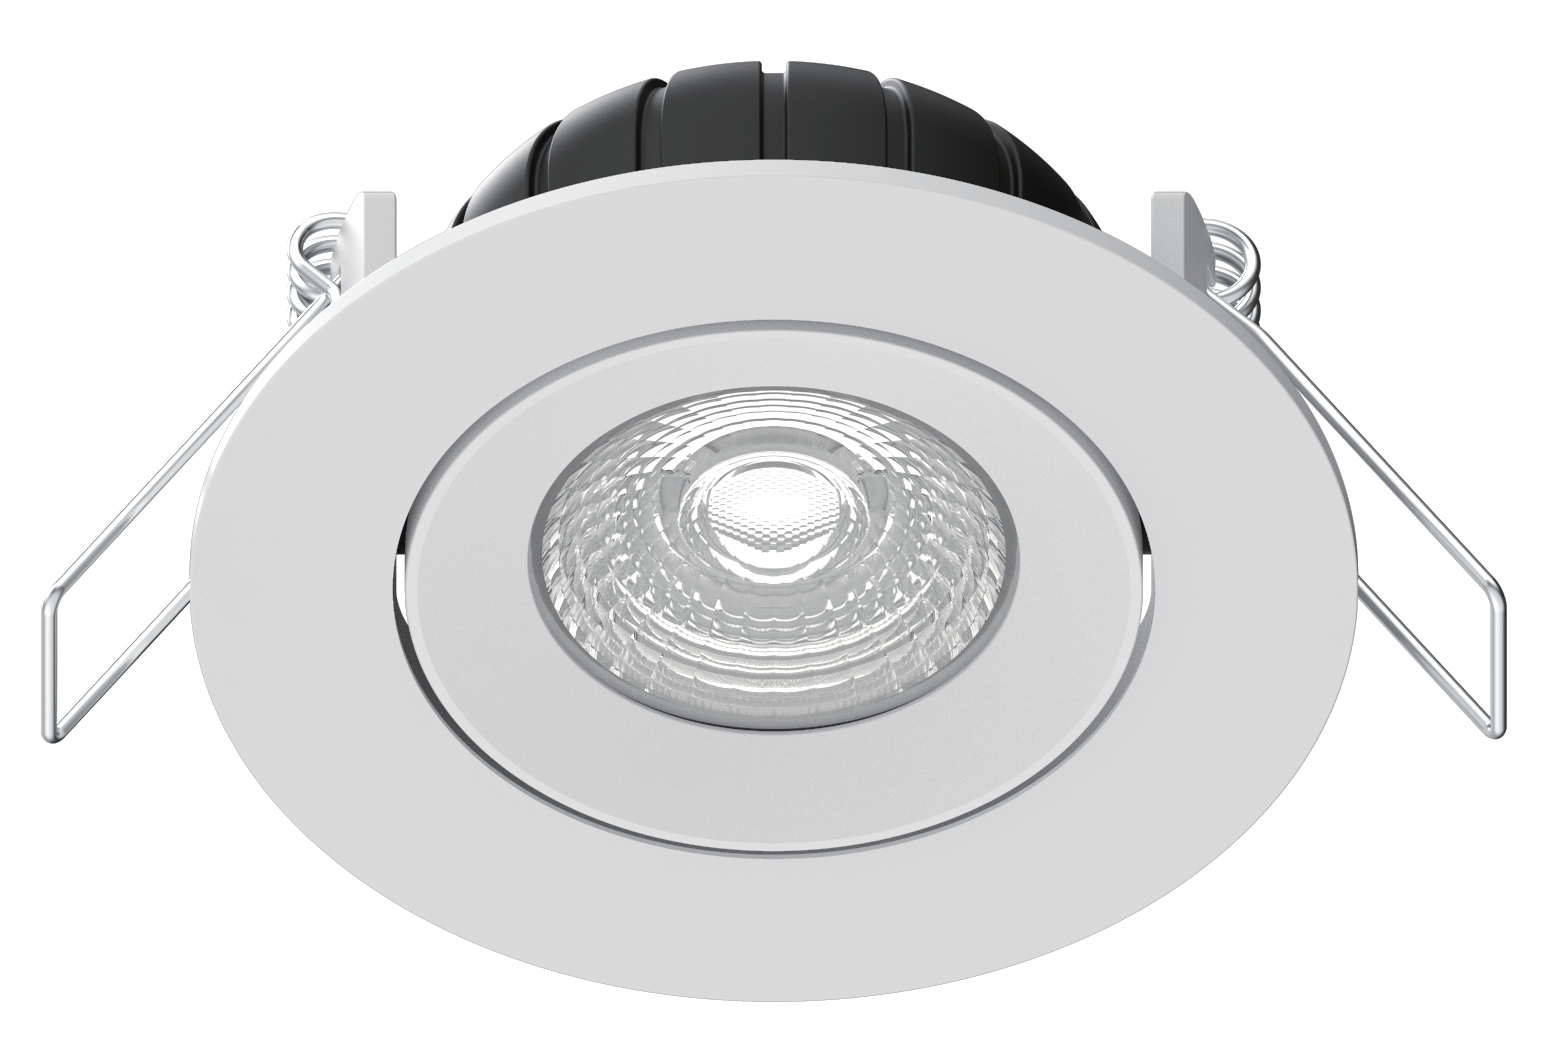 7W inchoigeartaithe Led downlight IP20 tosaigh 3CCT switchable